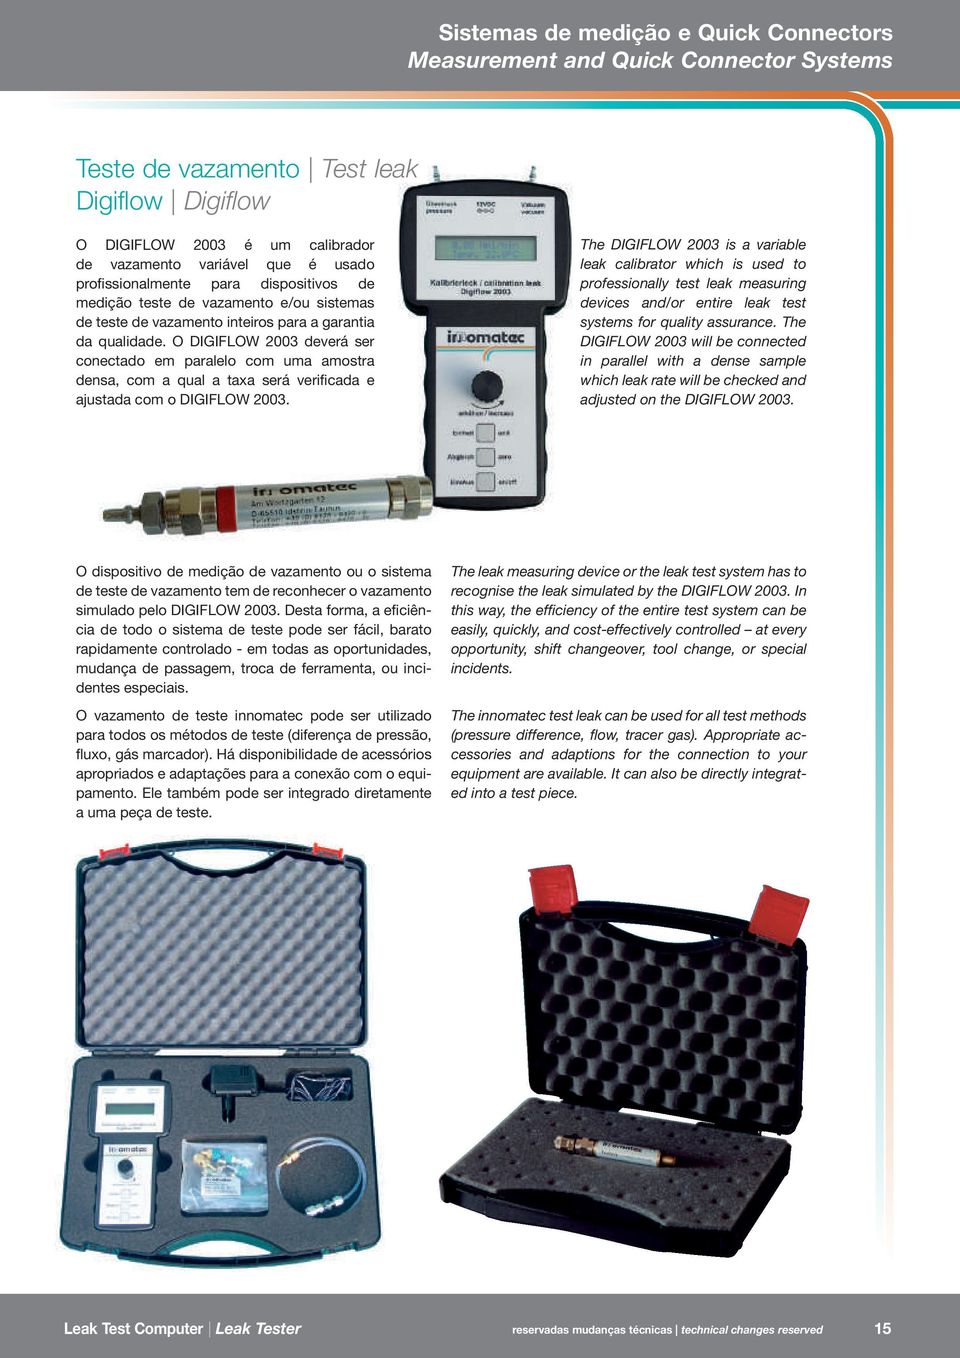 The DIGIFLOW 2003 is a variable leak calibrator which is used to professionally test leak measuring devices and/or entire leak test systems for quality assurance.